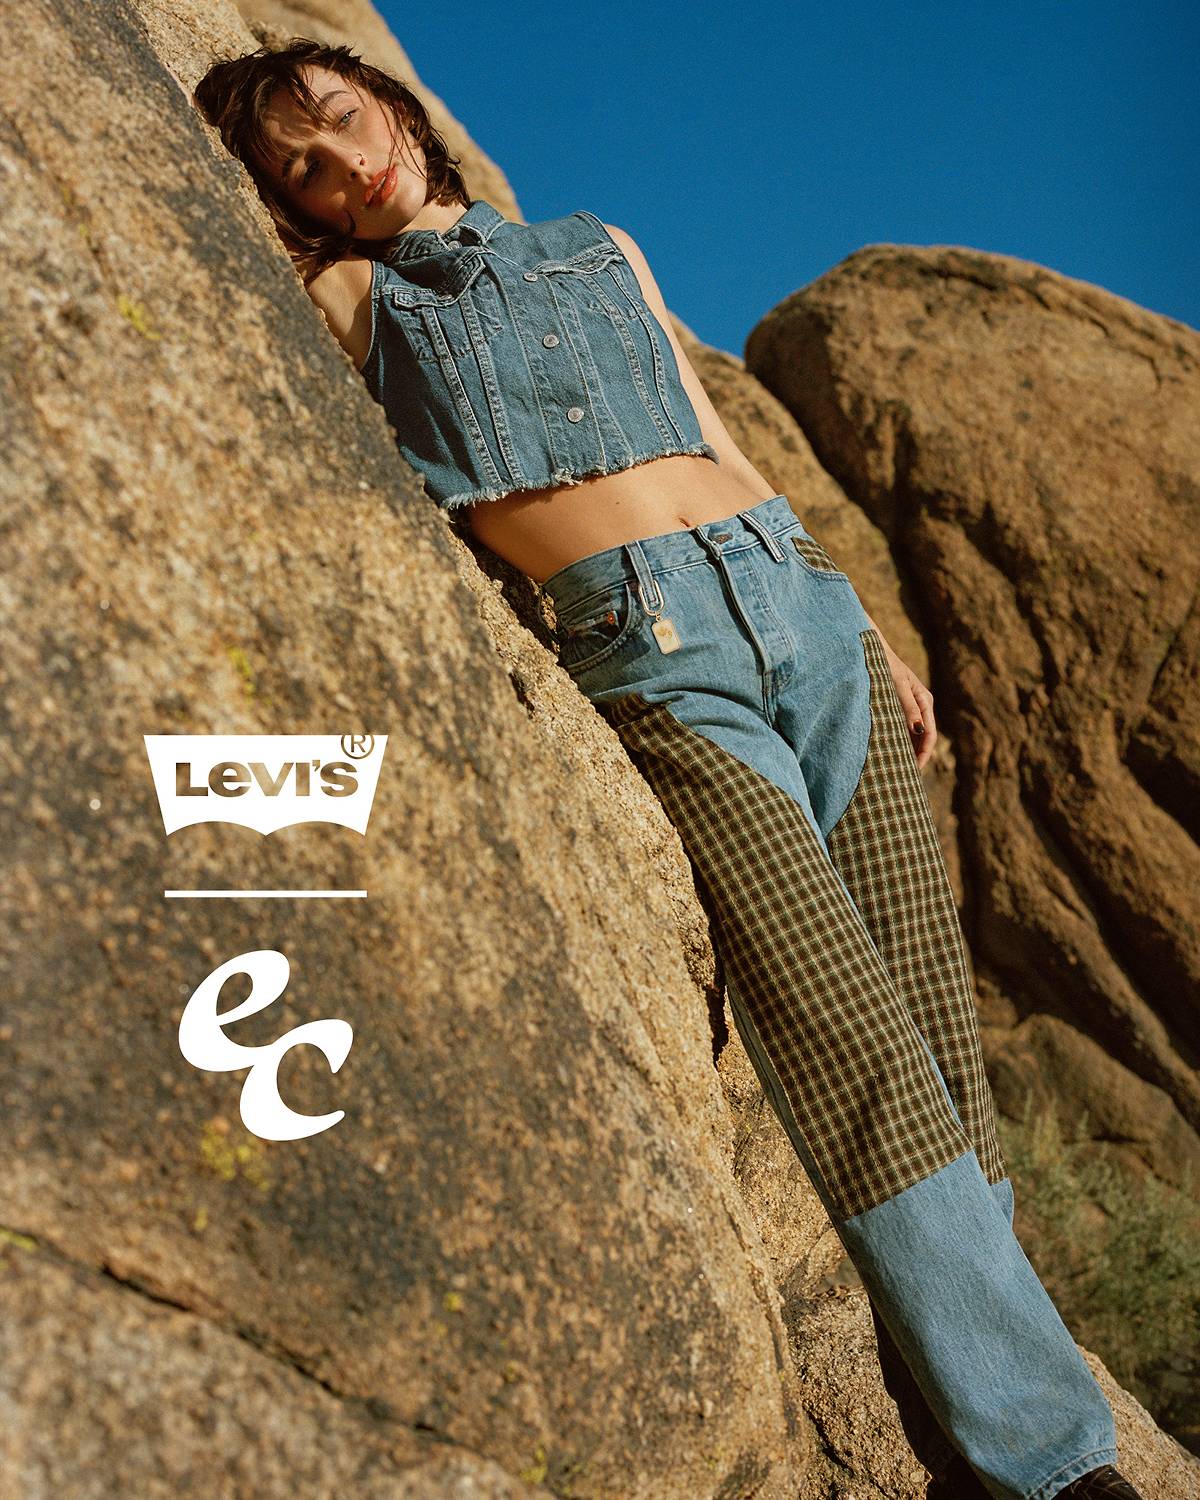 Emma Chamberlain styles our newest fit - Levi's